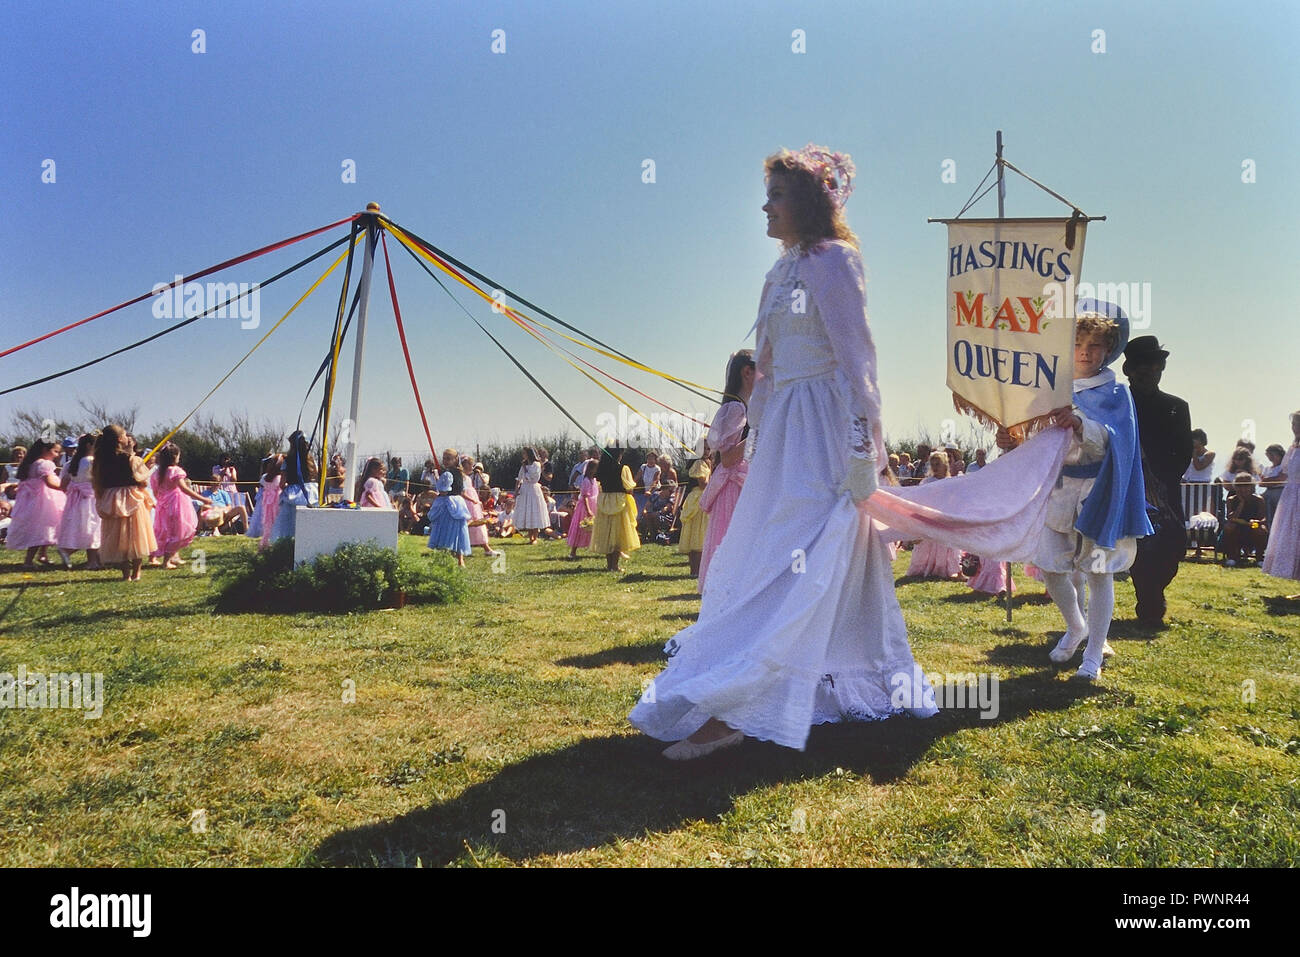 The Crowning of the May Queen, Hastings, East Sussex, England, UK. Circa 1990's Stock Photo